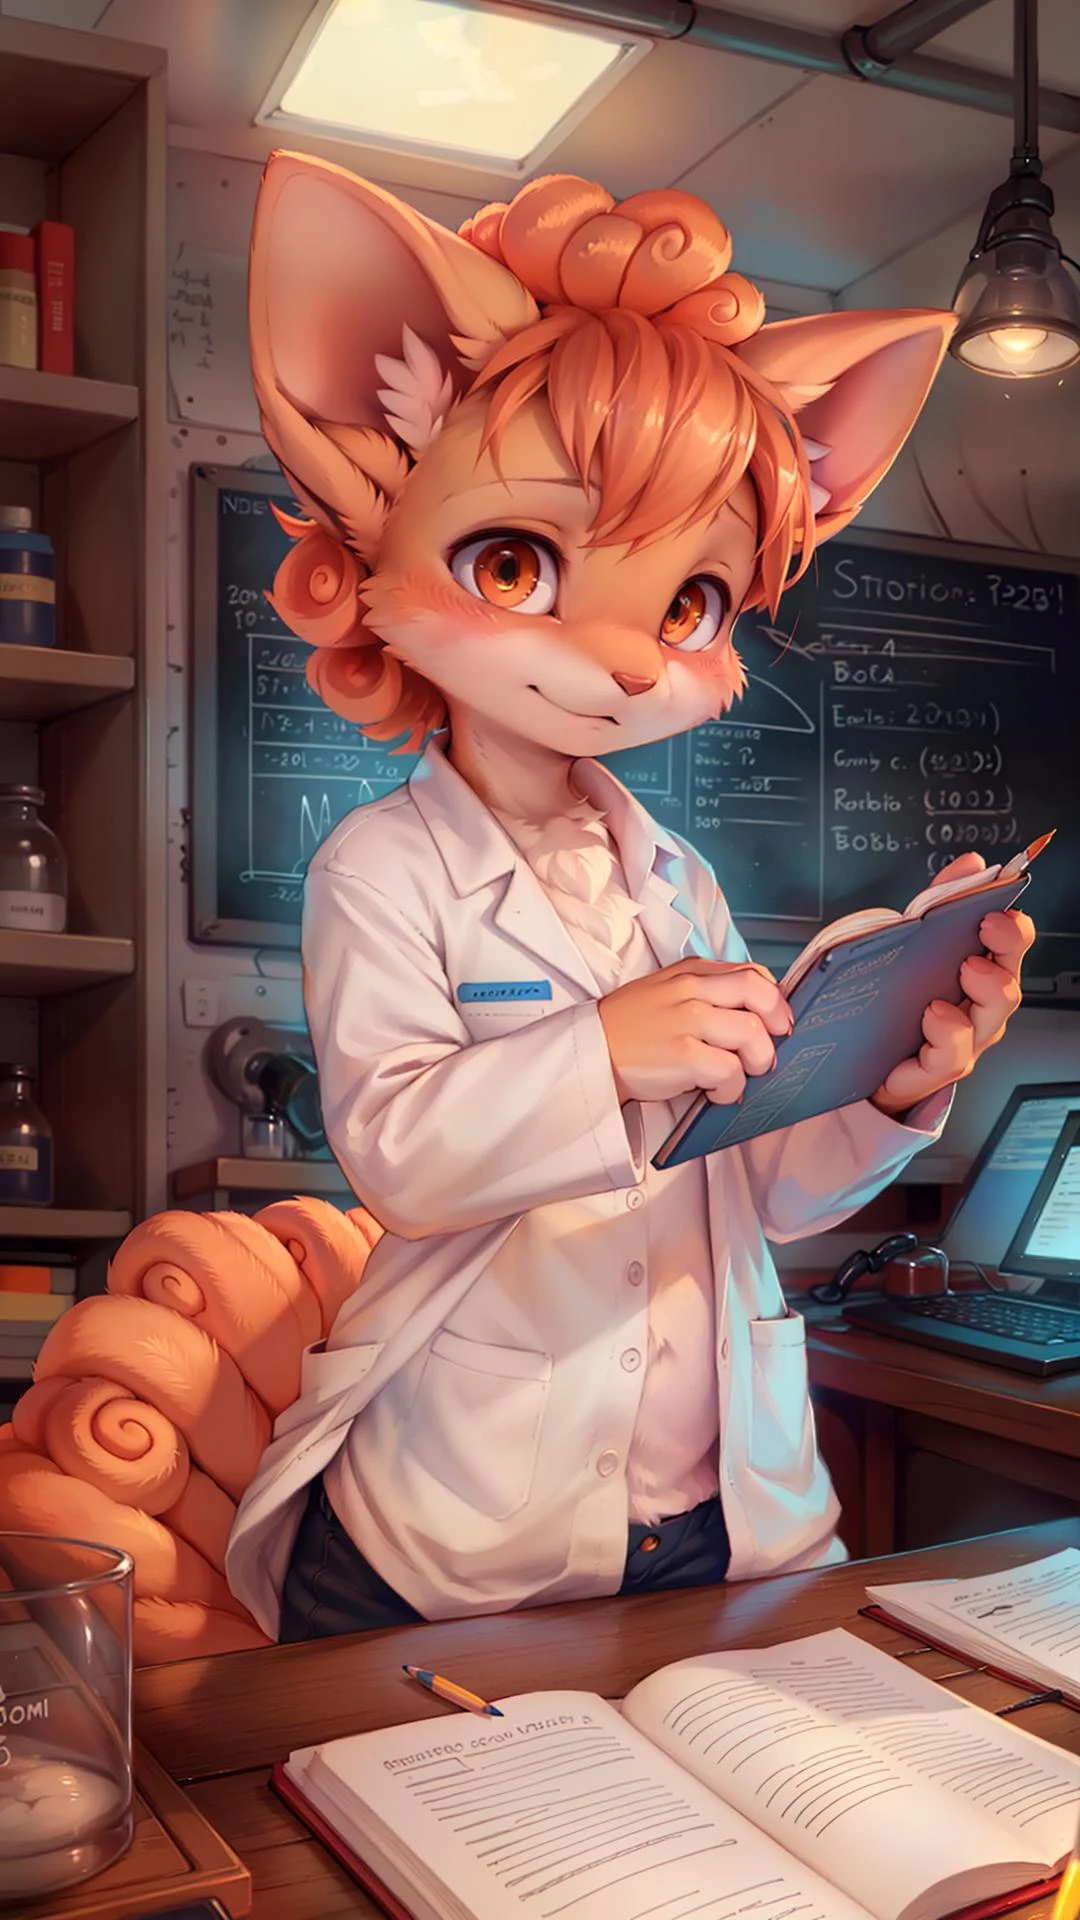 detailed background, a modern laboratory with high-tech equipment and glowing monitors, shelves filled with colorful vials and beakers. In the center of the lab stands a((petite, slim)(Vulpix:1.2))female scientist wearing a pristine white lab coat, (her vibrant orange fur contrasting against the sterile environment). Her((intelligent amber eyes:1.1)sparkle with curiosity), as she peers through a microscope, (small paw carefully adjusting the focus), (scientific papers scattered across the desk). The room is filled with an air of intellectual energy as she scribbles notes in her notebook, (pencil poised between her delicate paws). Behind her, intricate formulas and equations are written on a chalkboard, (charts and graphs detailing her latest findings), (state-of-the-art machinery humming softly in the background), [by dagasi|ancesra:0.6], [by foxovh|personalami:1.1], [by einshelm|tom_fischbach], (by Hioshiru:0.9), [by zackary911, by thebigslick]